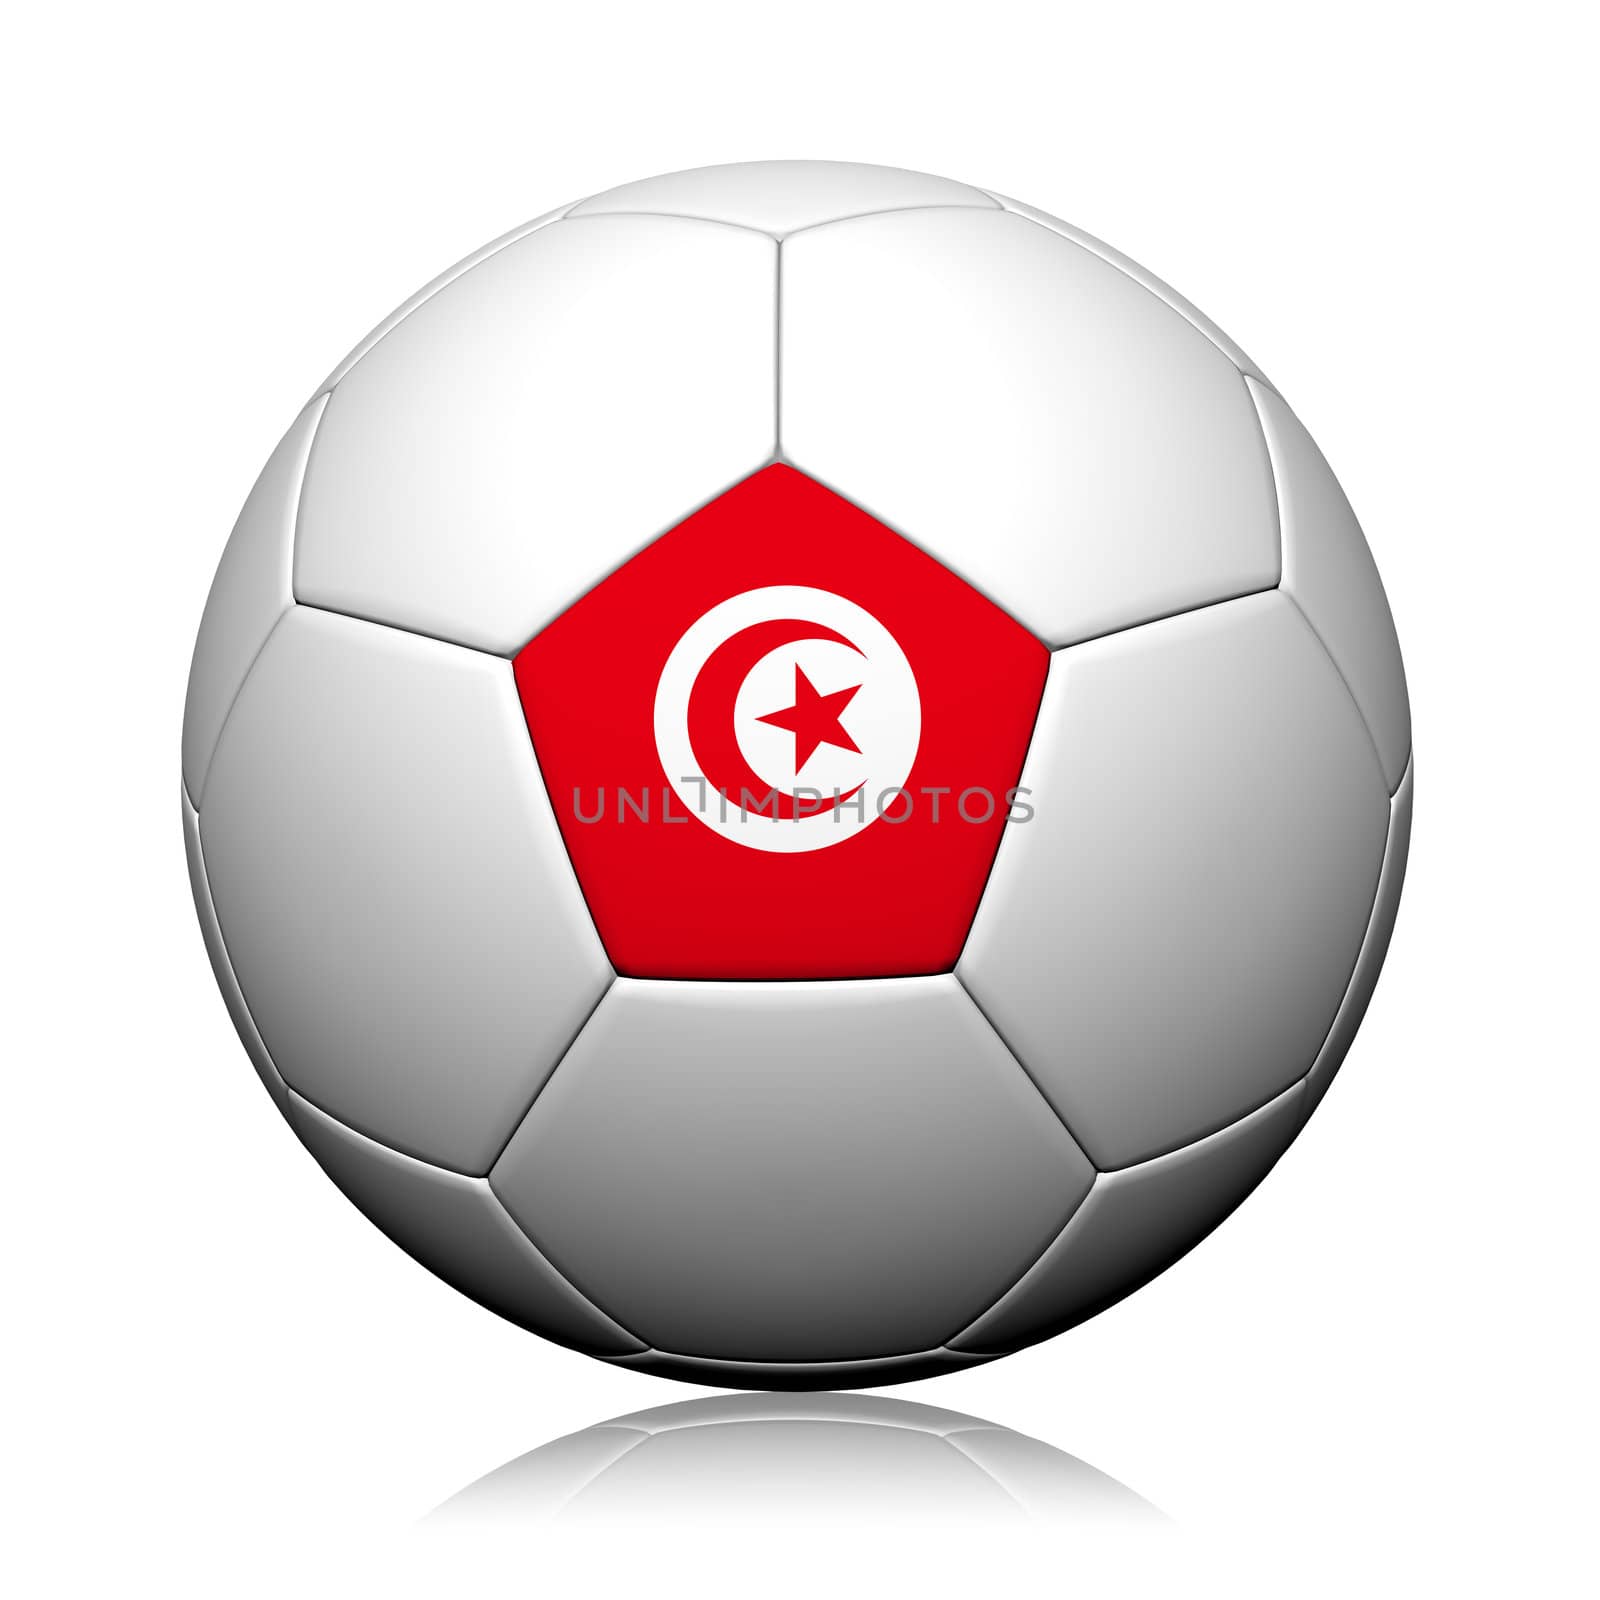 Tunisia Flag Pattern 3d rendering of a soccer ball